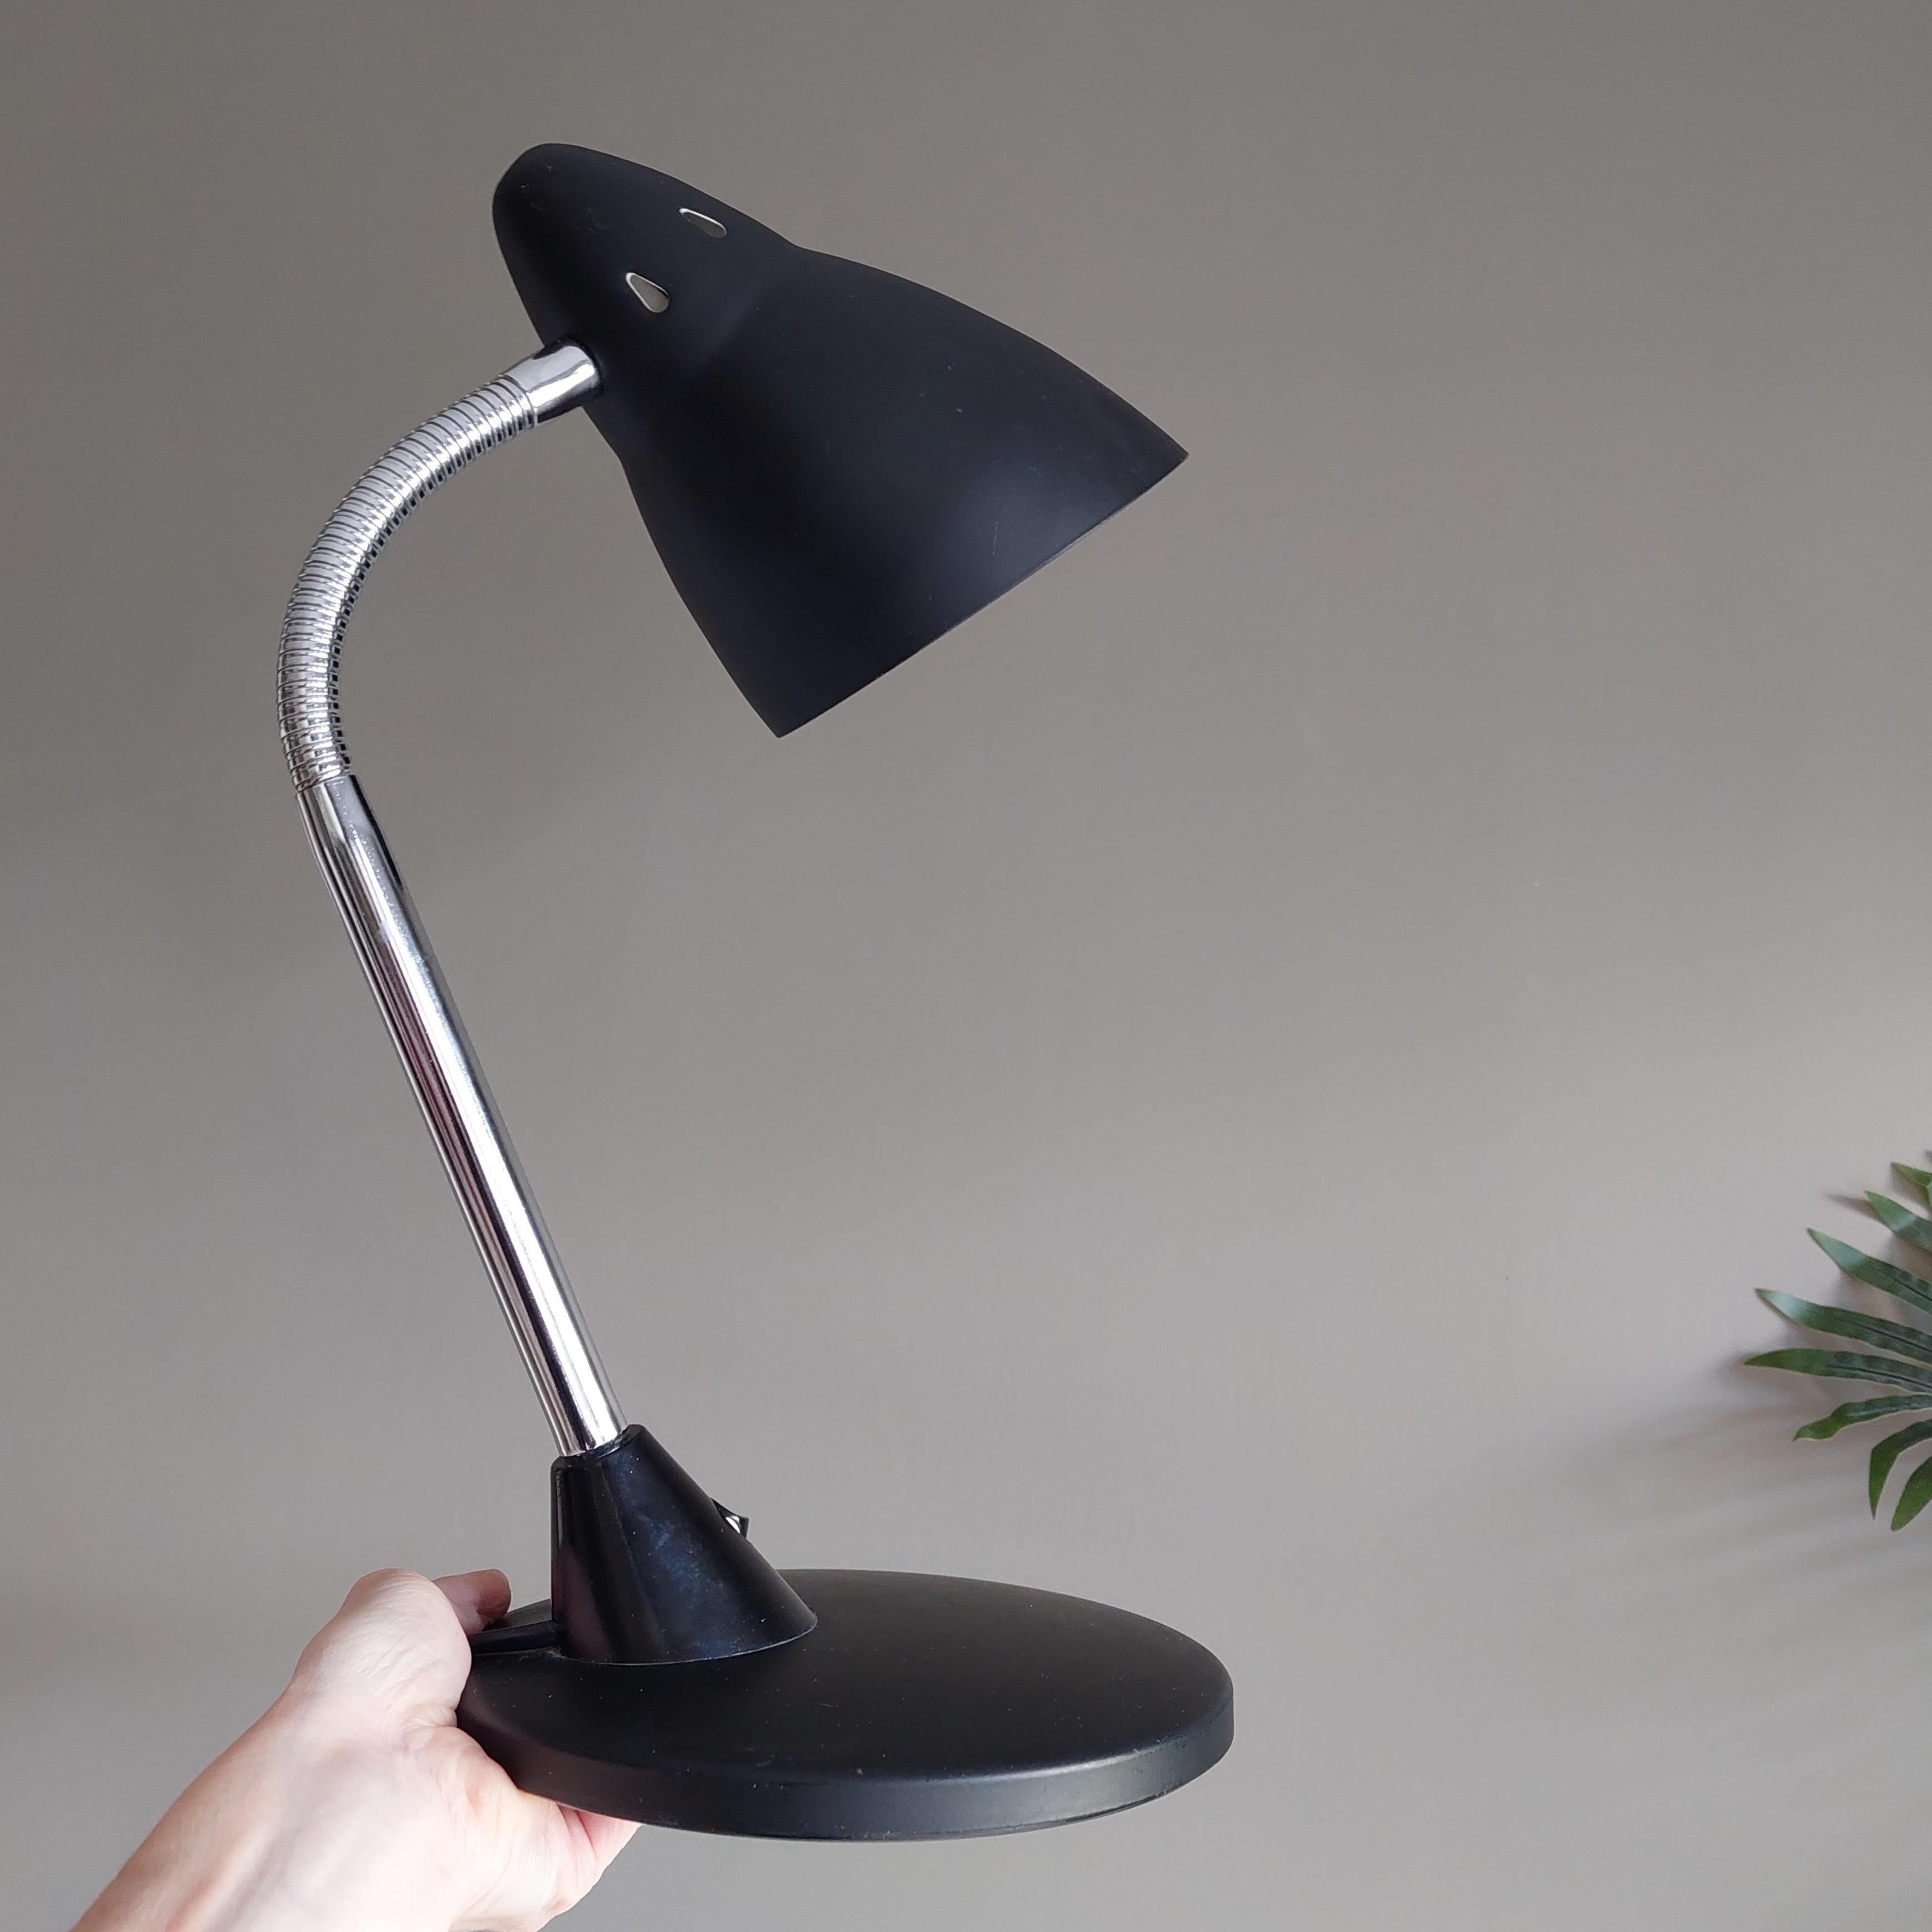 F Line Brooklyn black desk lamp vintage retro mcm.
Vintage chrome and black metal desk lamp.
Black matt finish
Stylish, chrome-plated vintage gooseneck lamp from the 70s/80s. 
Its neck allows it to be positioned at any angle. 

It is very stable and